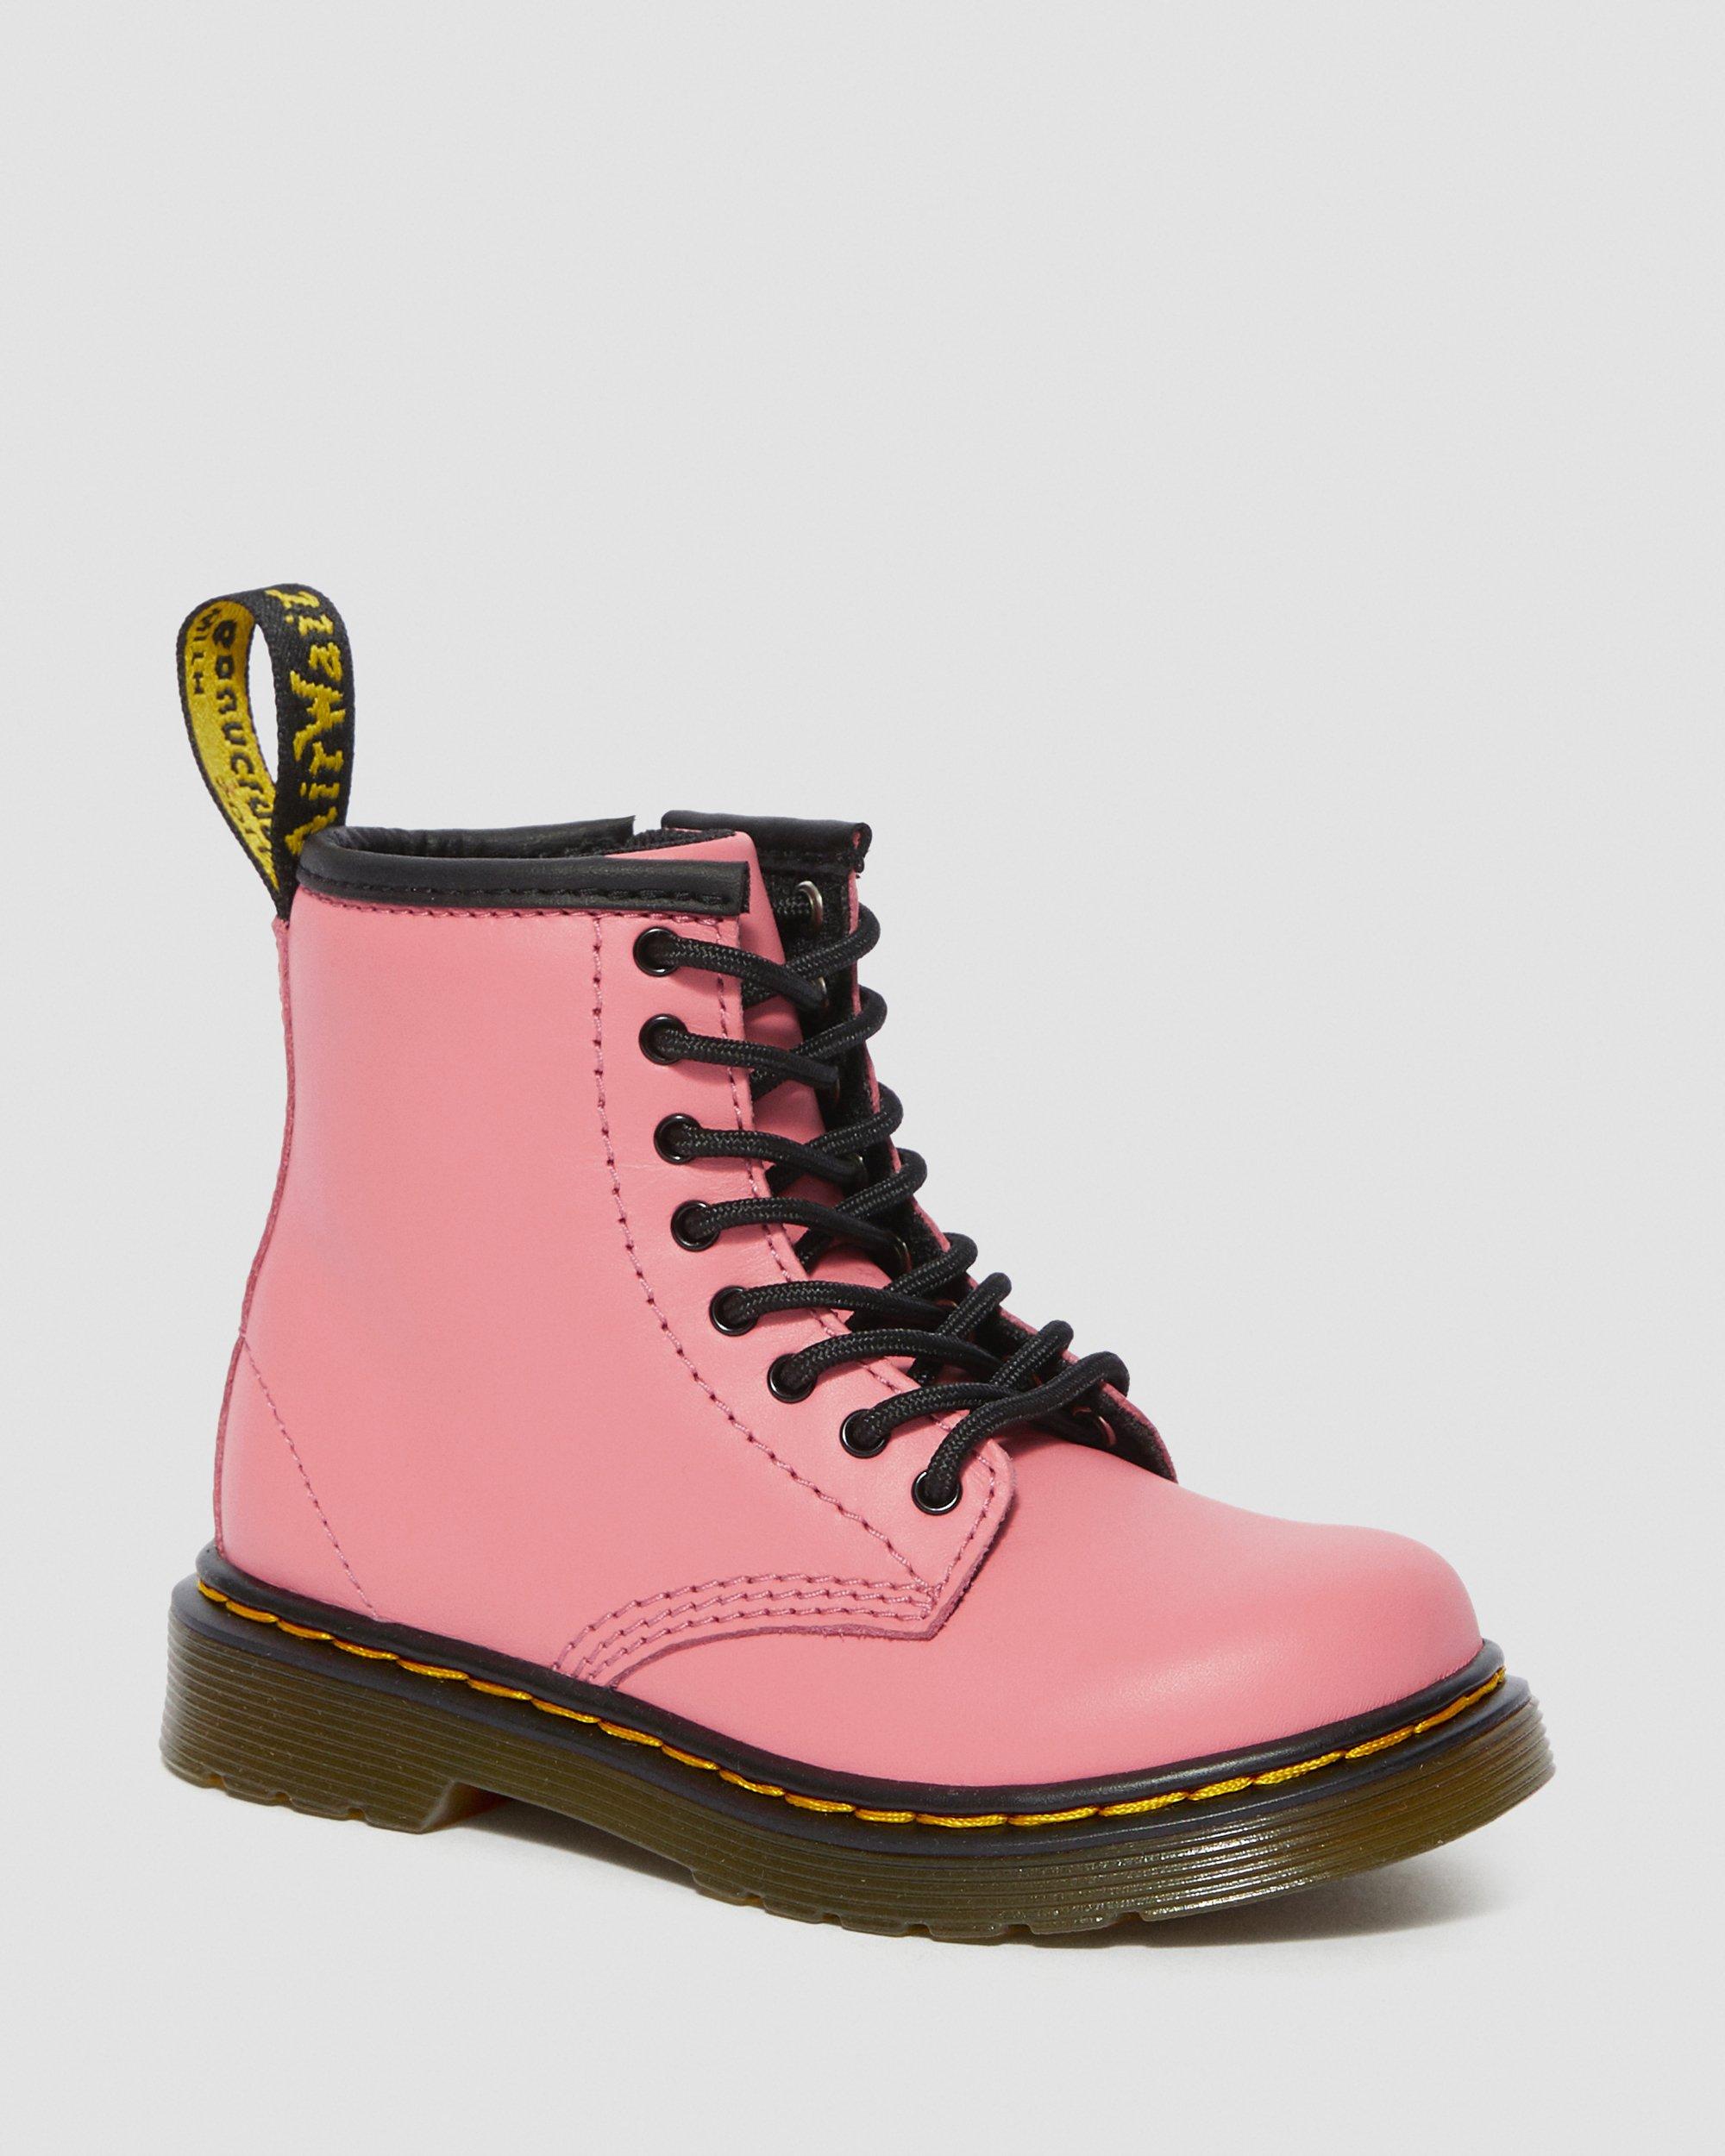 TODDLER 1460 LEATHER ANKLE BOOTS in Acid Pink | Dr. Martens